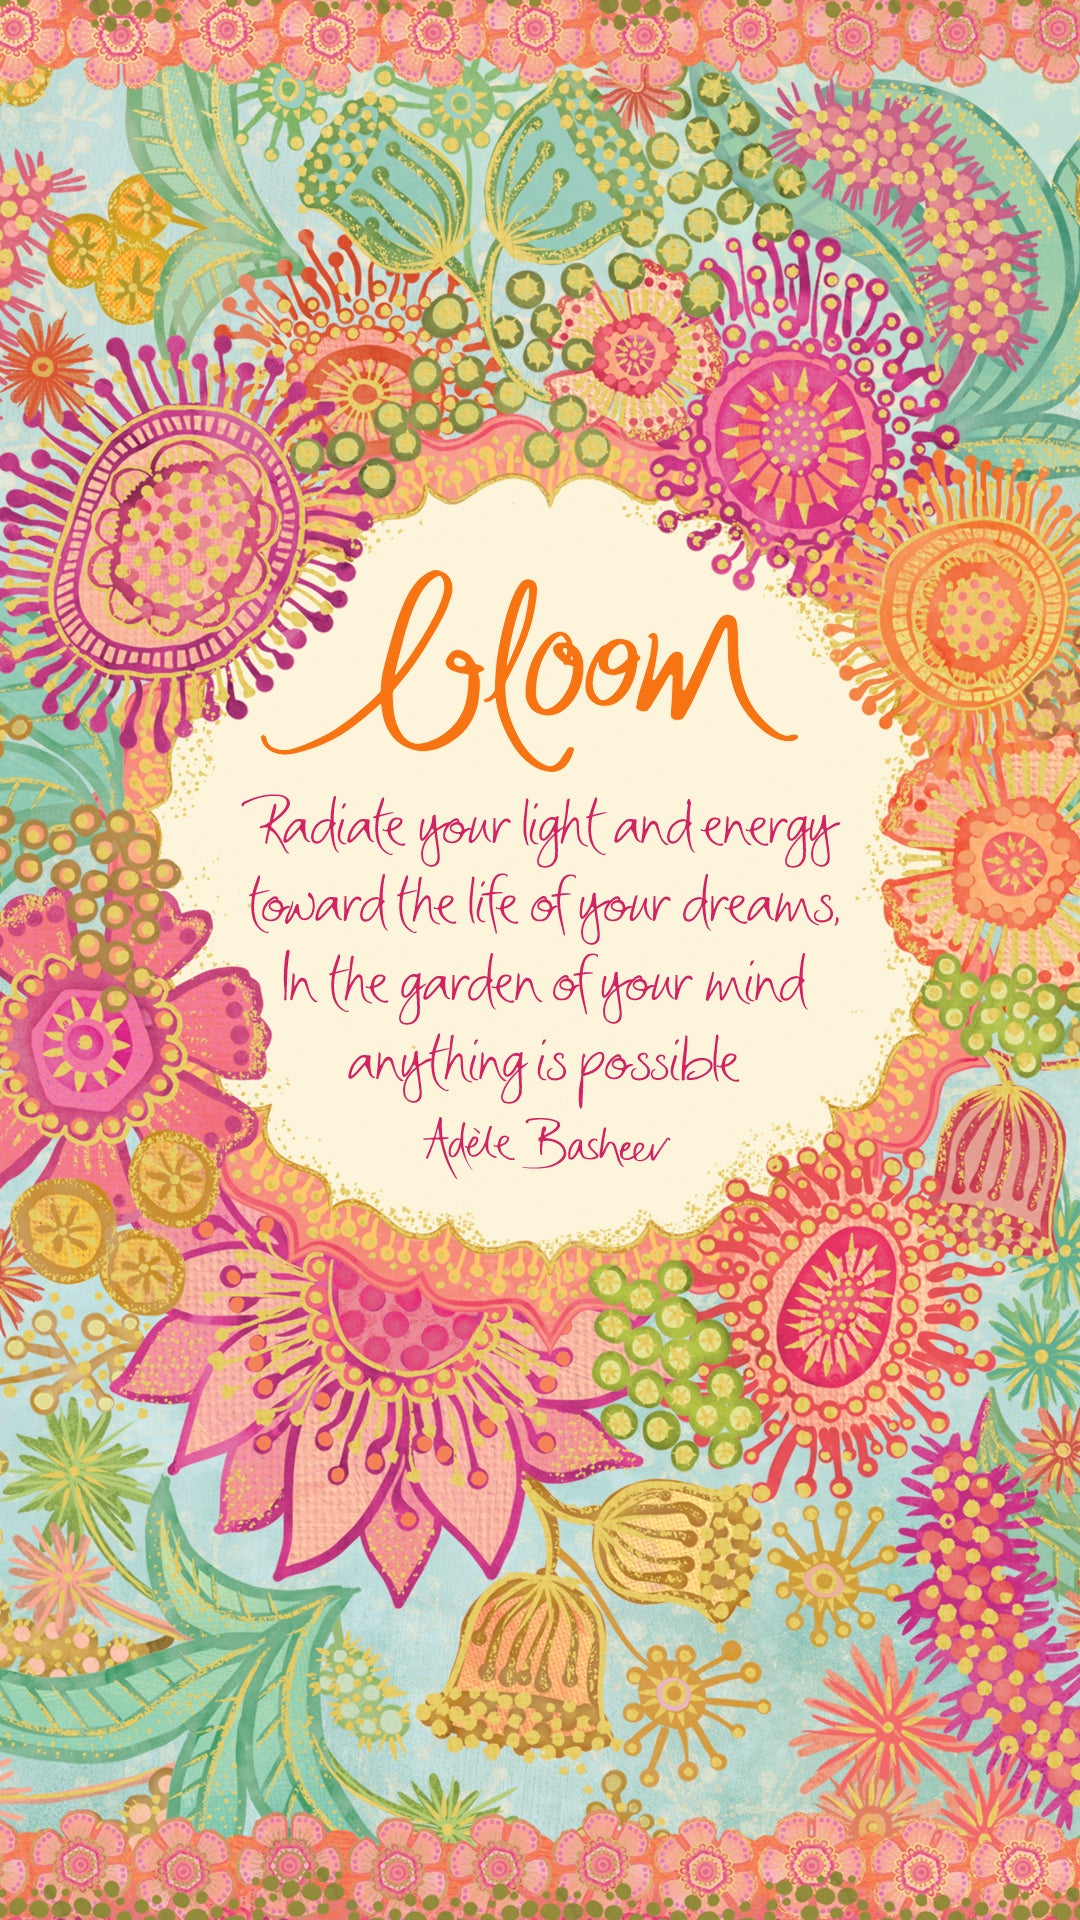 Adele Basheer from Intrinsic's Bloom Downloadable Quote